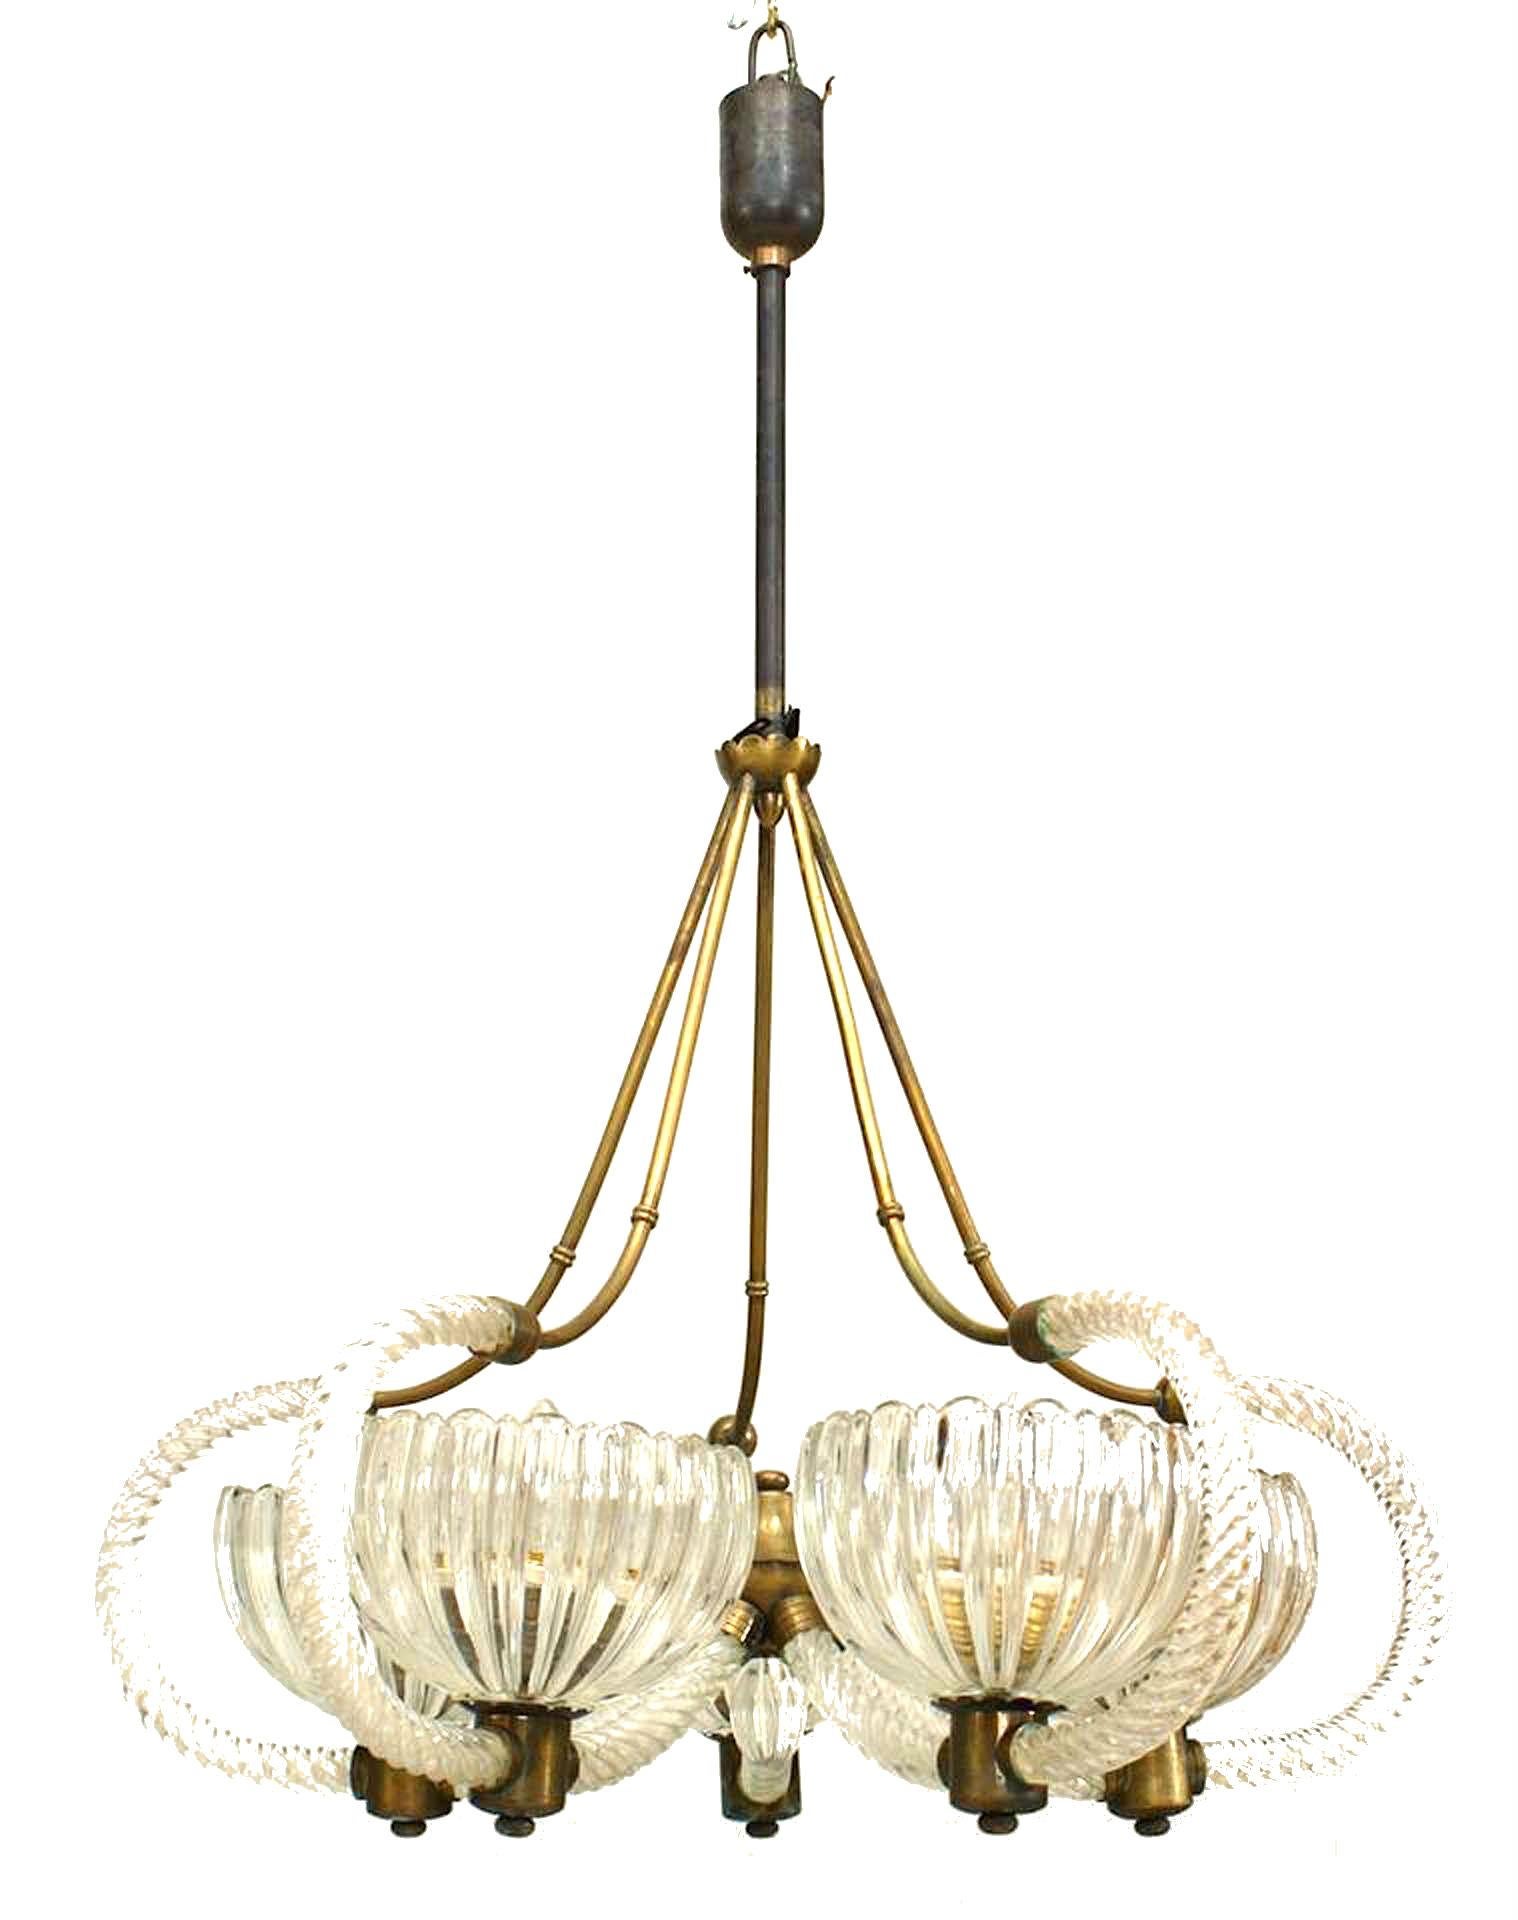 Barovier et Toso Italian Venetian Murano Brass and Glass Chandelier In Good Condition For Sale In New York, NY